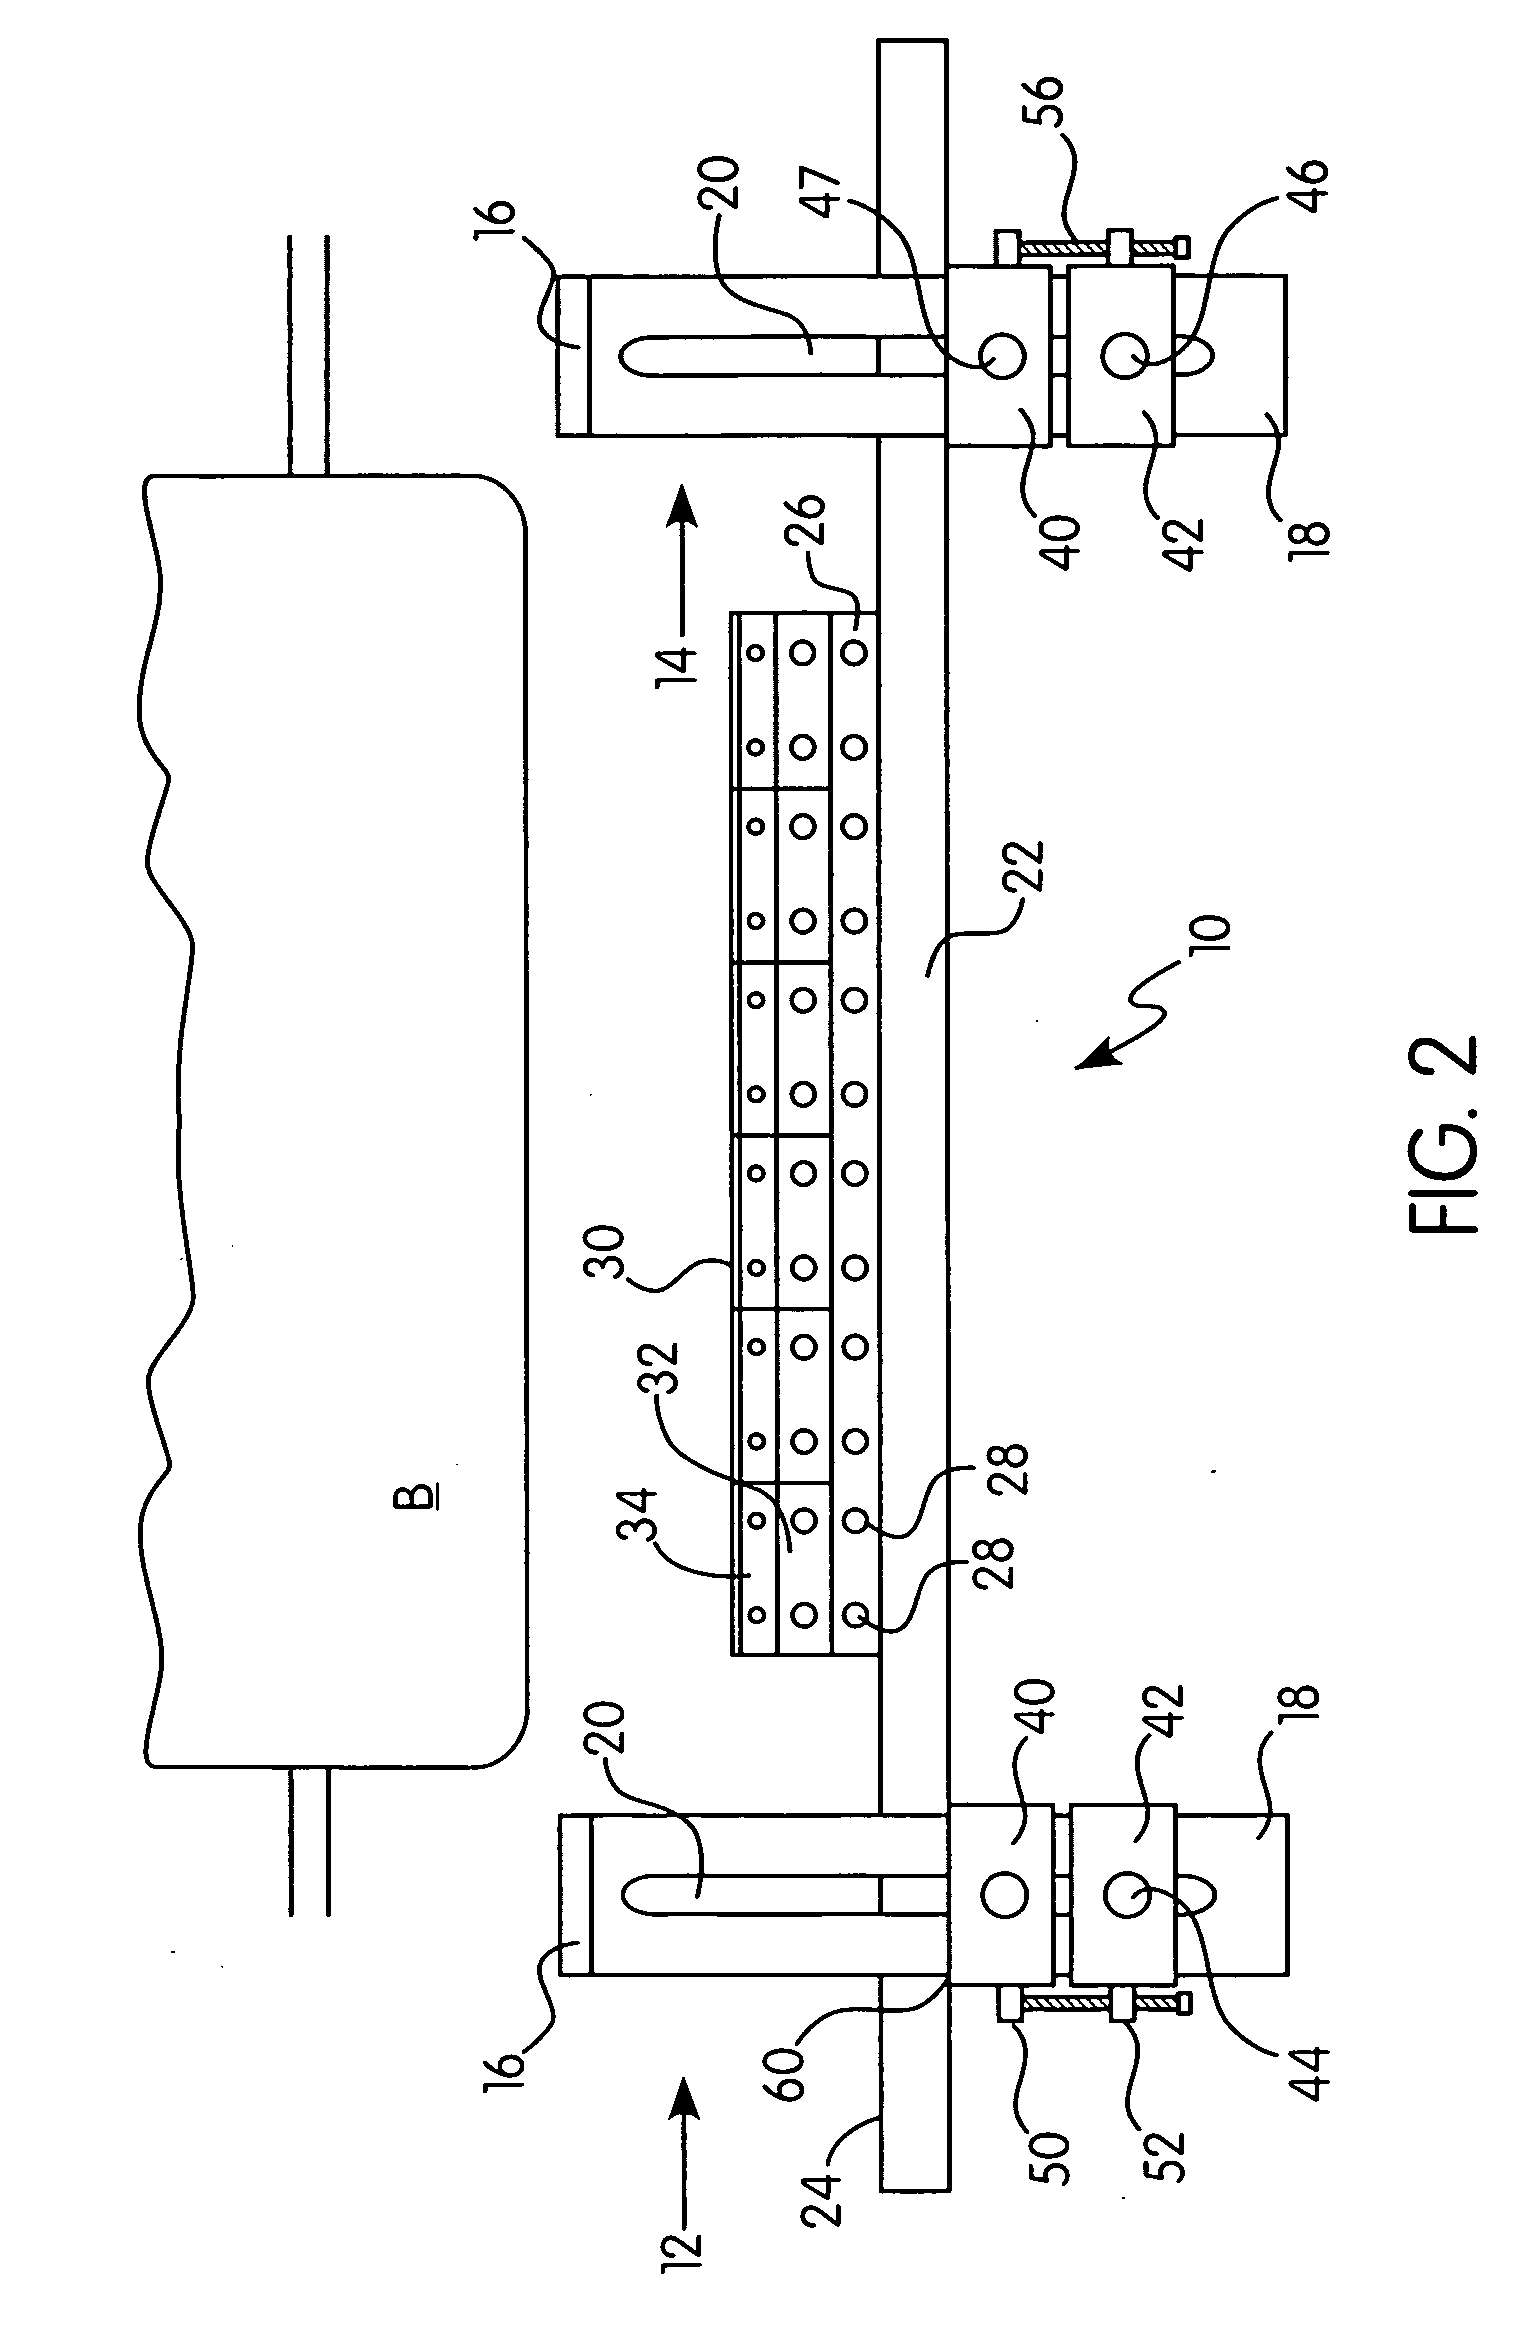 Secondary conveyor belt cleaner and mounting system therefor